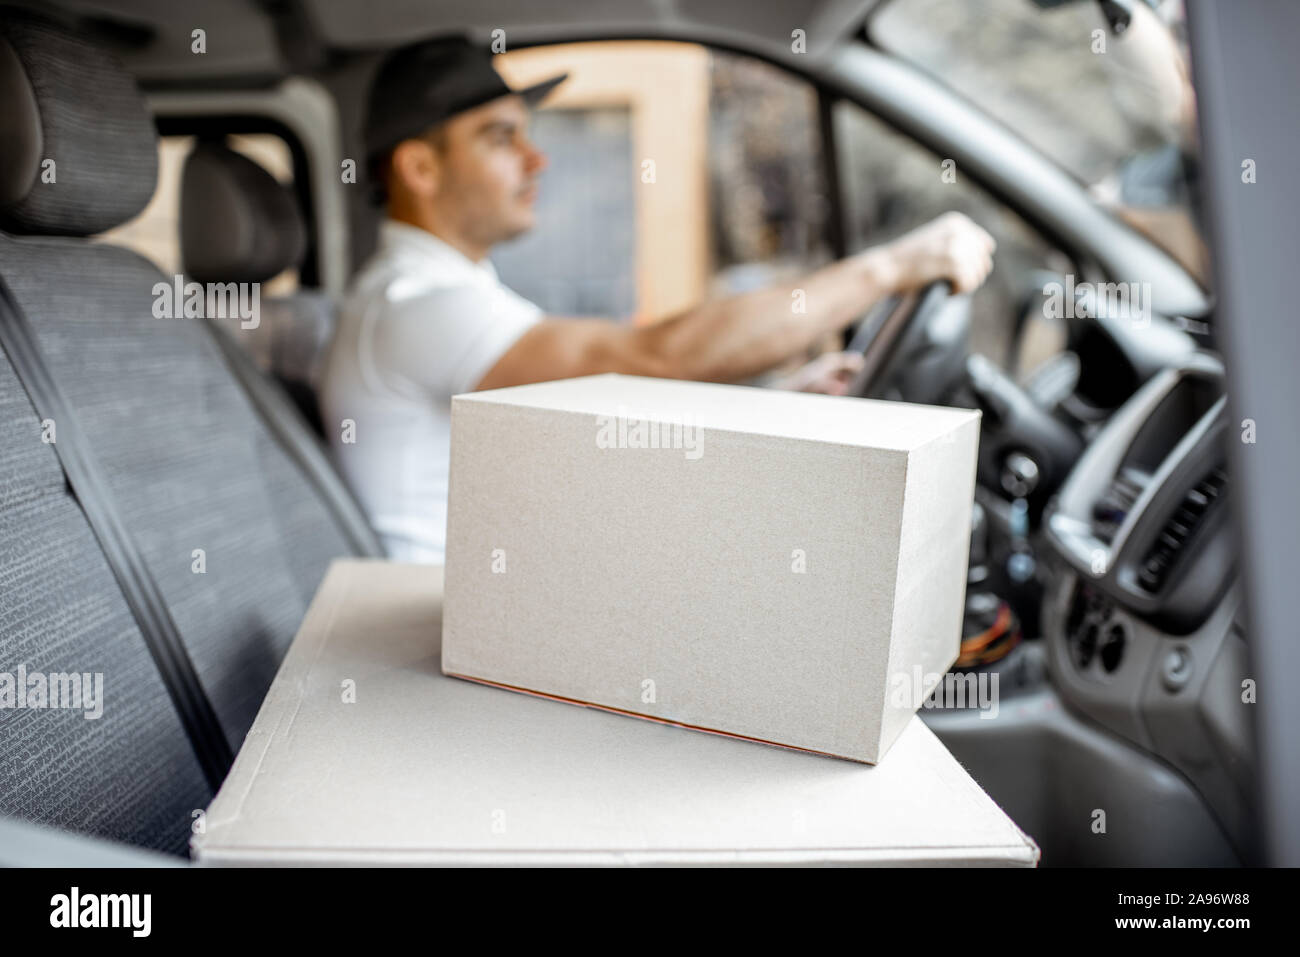 Delivery man driving cargo vehicle with parcels on the passenger seat, image focused on the cardboard boxes with blank space Stock Photo